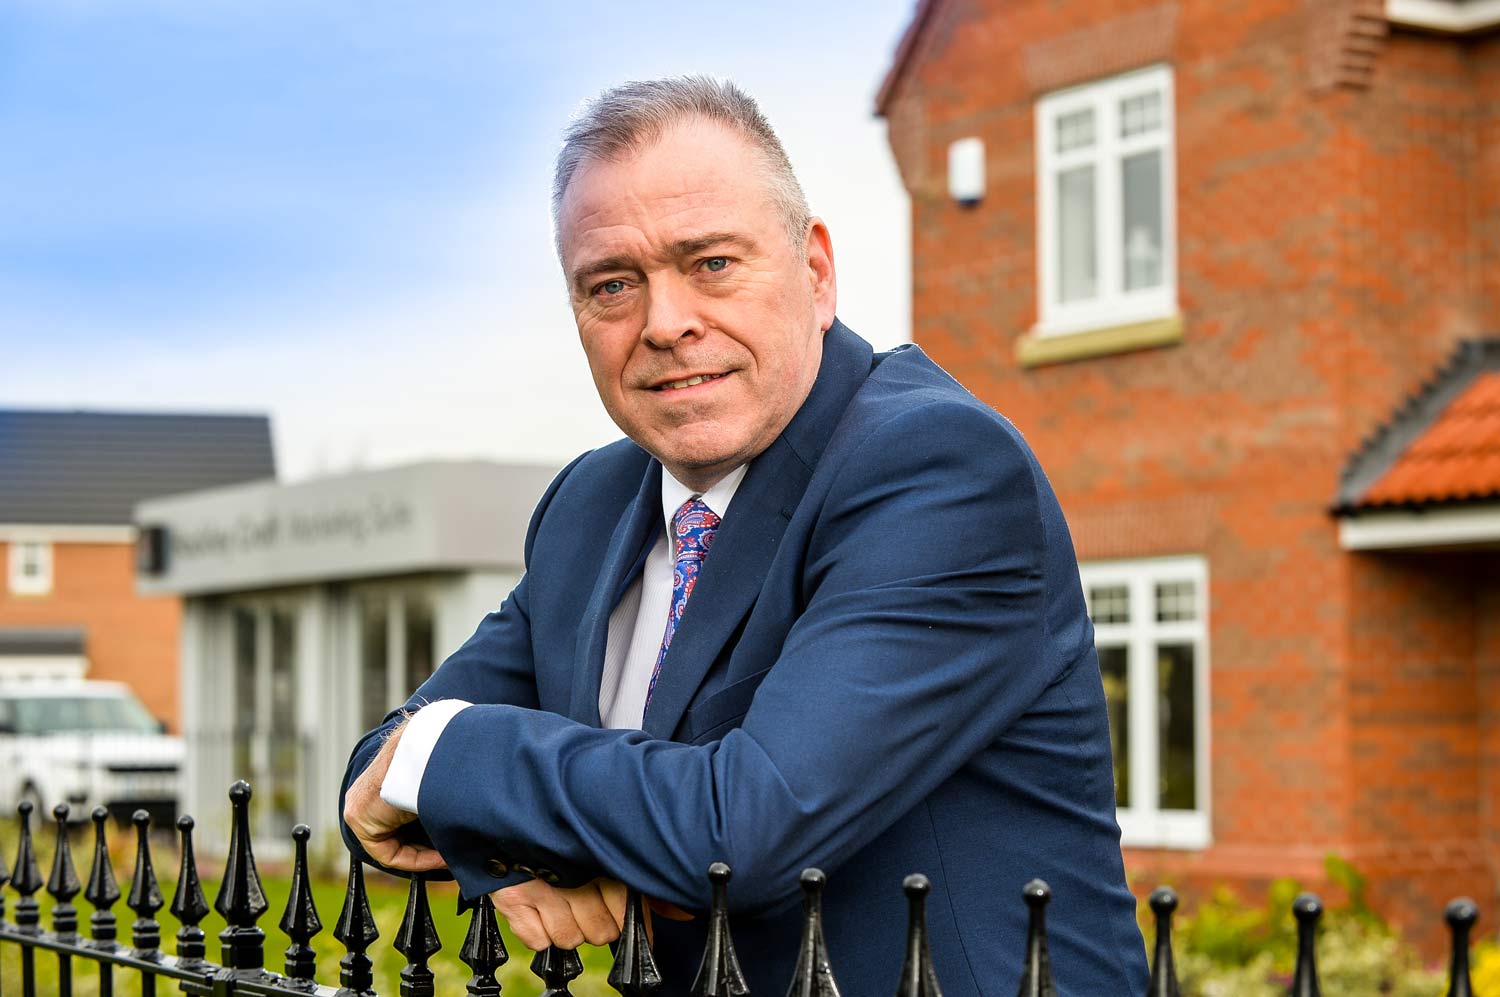 Noel Adams, 55, has almost four decades of experience working within the housebuilding industry